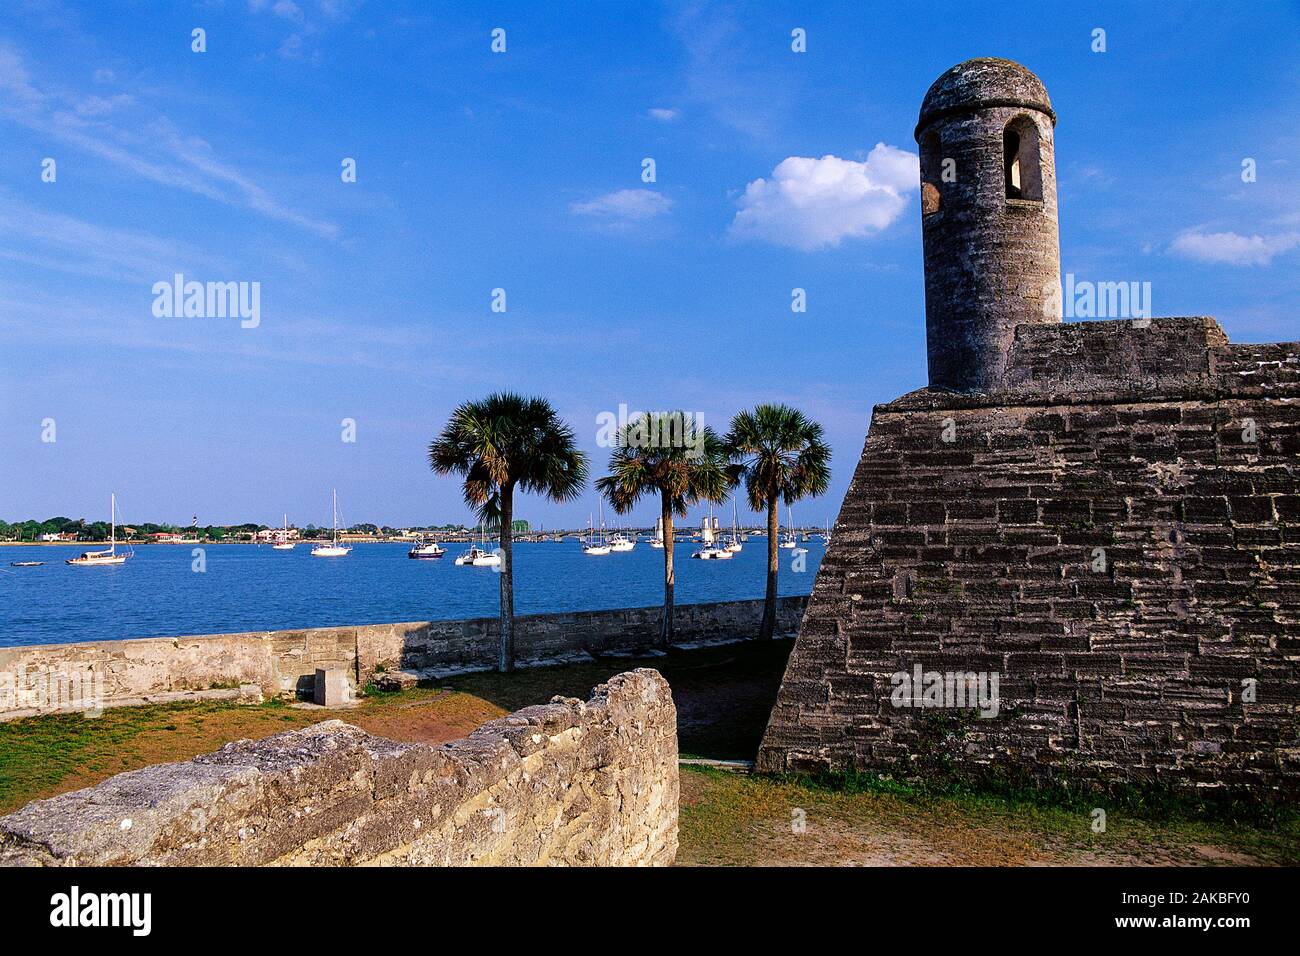 Ocean and tower of Castillo de San Marcos, St Augustine, Florida, USA Stock Photo